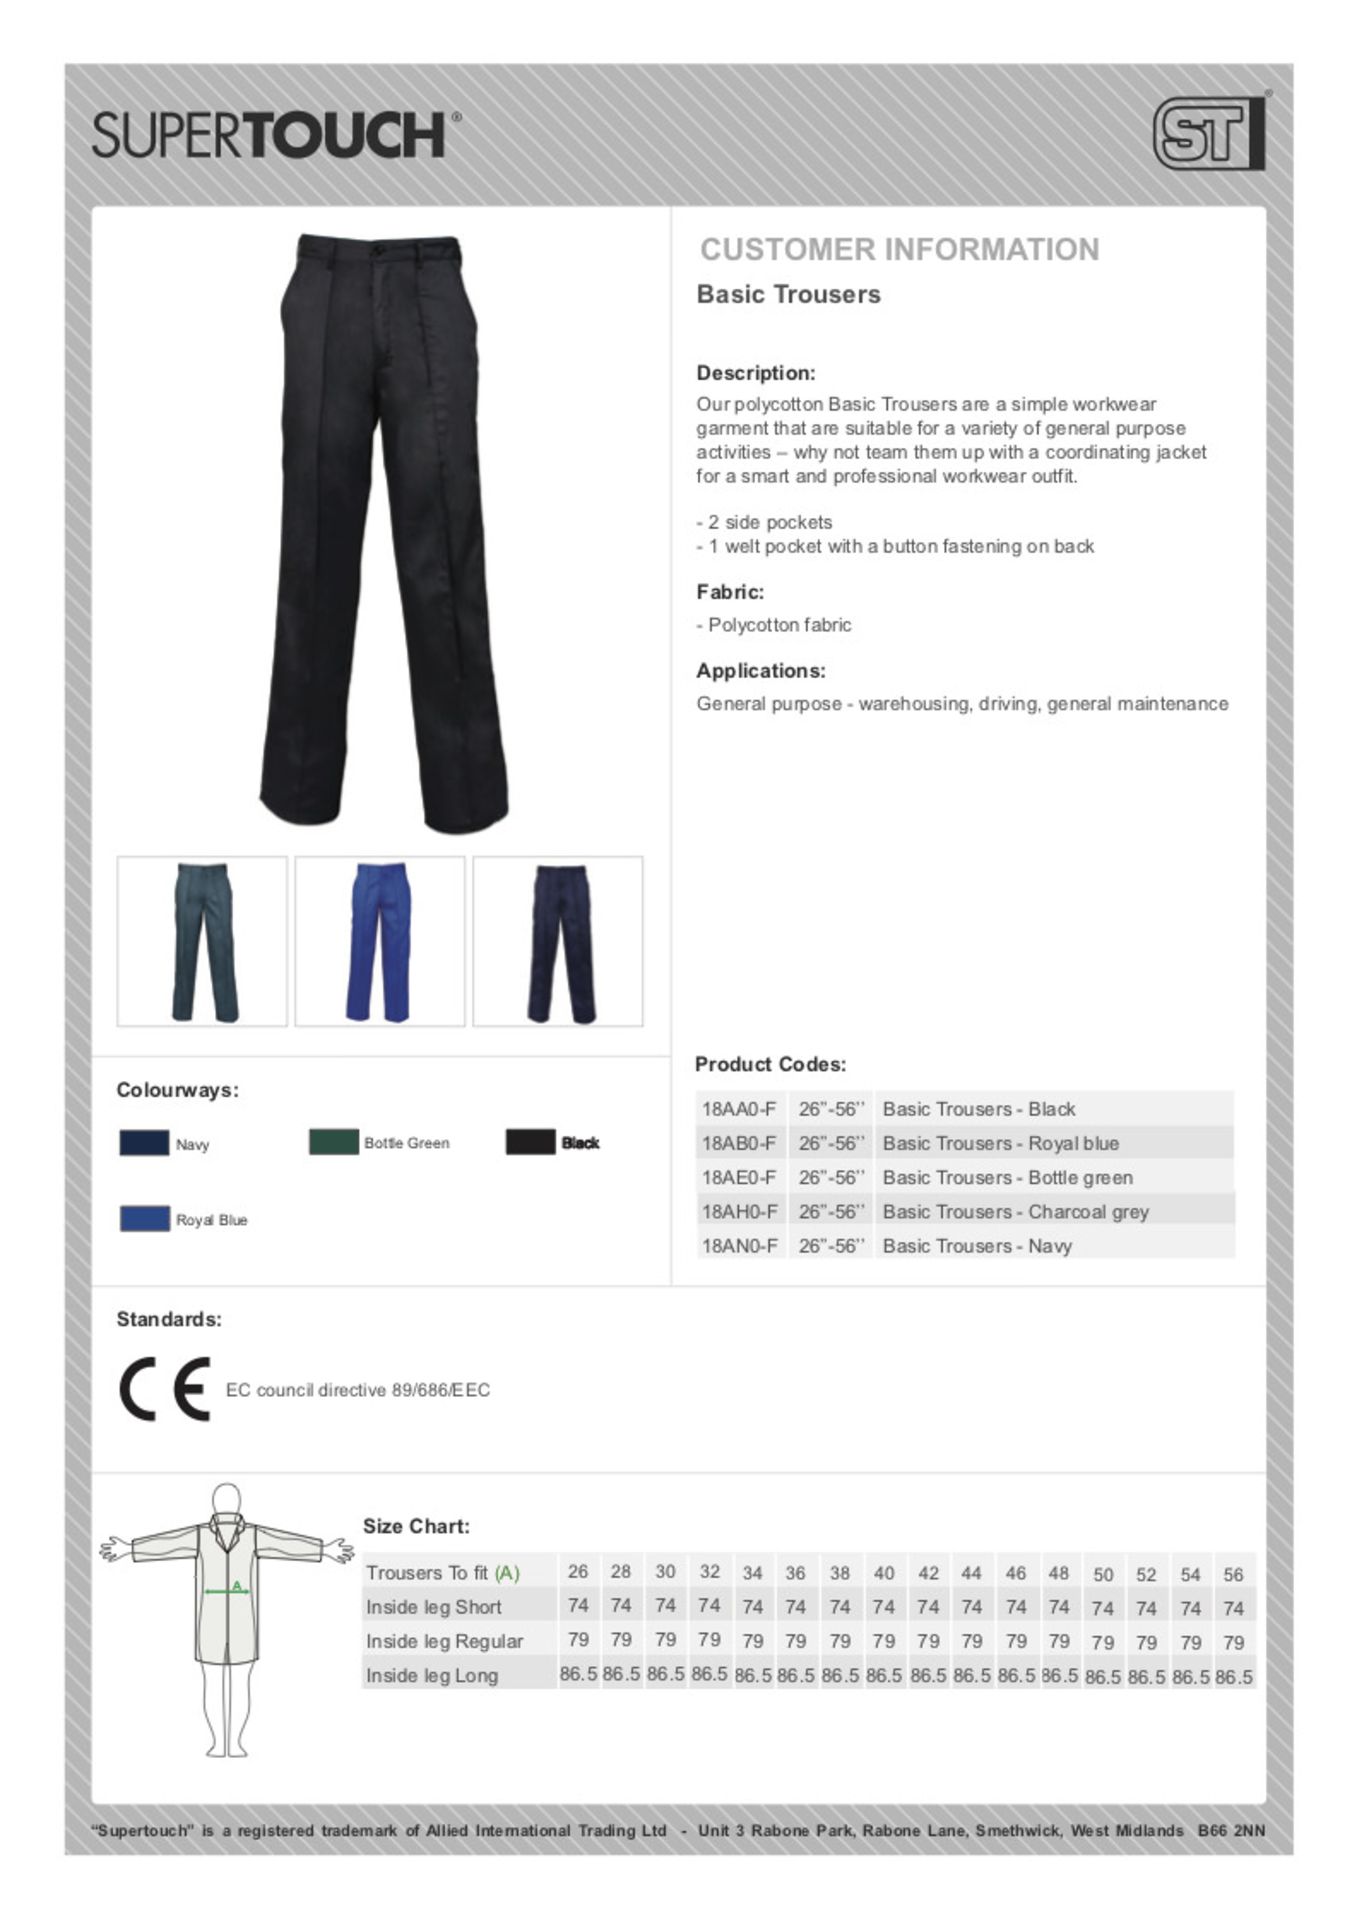 20 x high quality SuperTouch Reg Trouser - Black - W40 - 210 Gms - Poly/Cot 65/35 - 3 Pockets . Sugg - Image 2 of 2